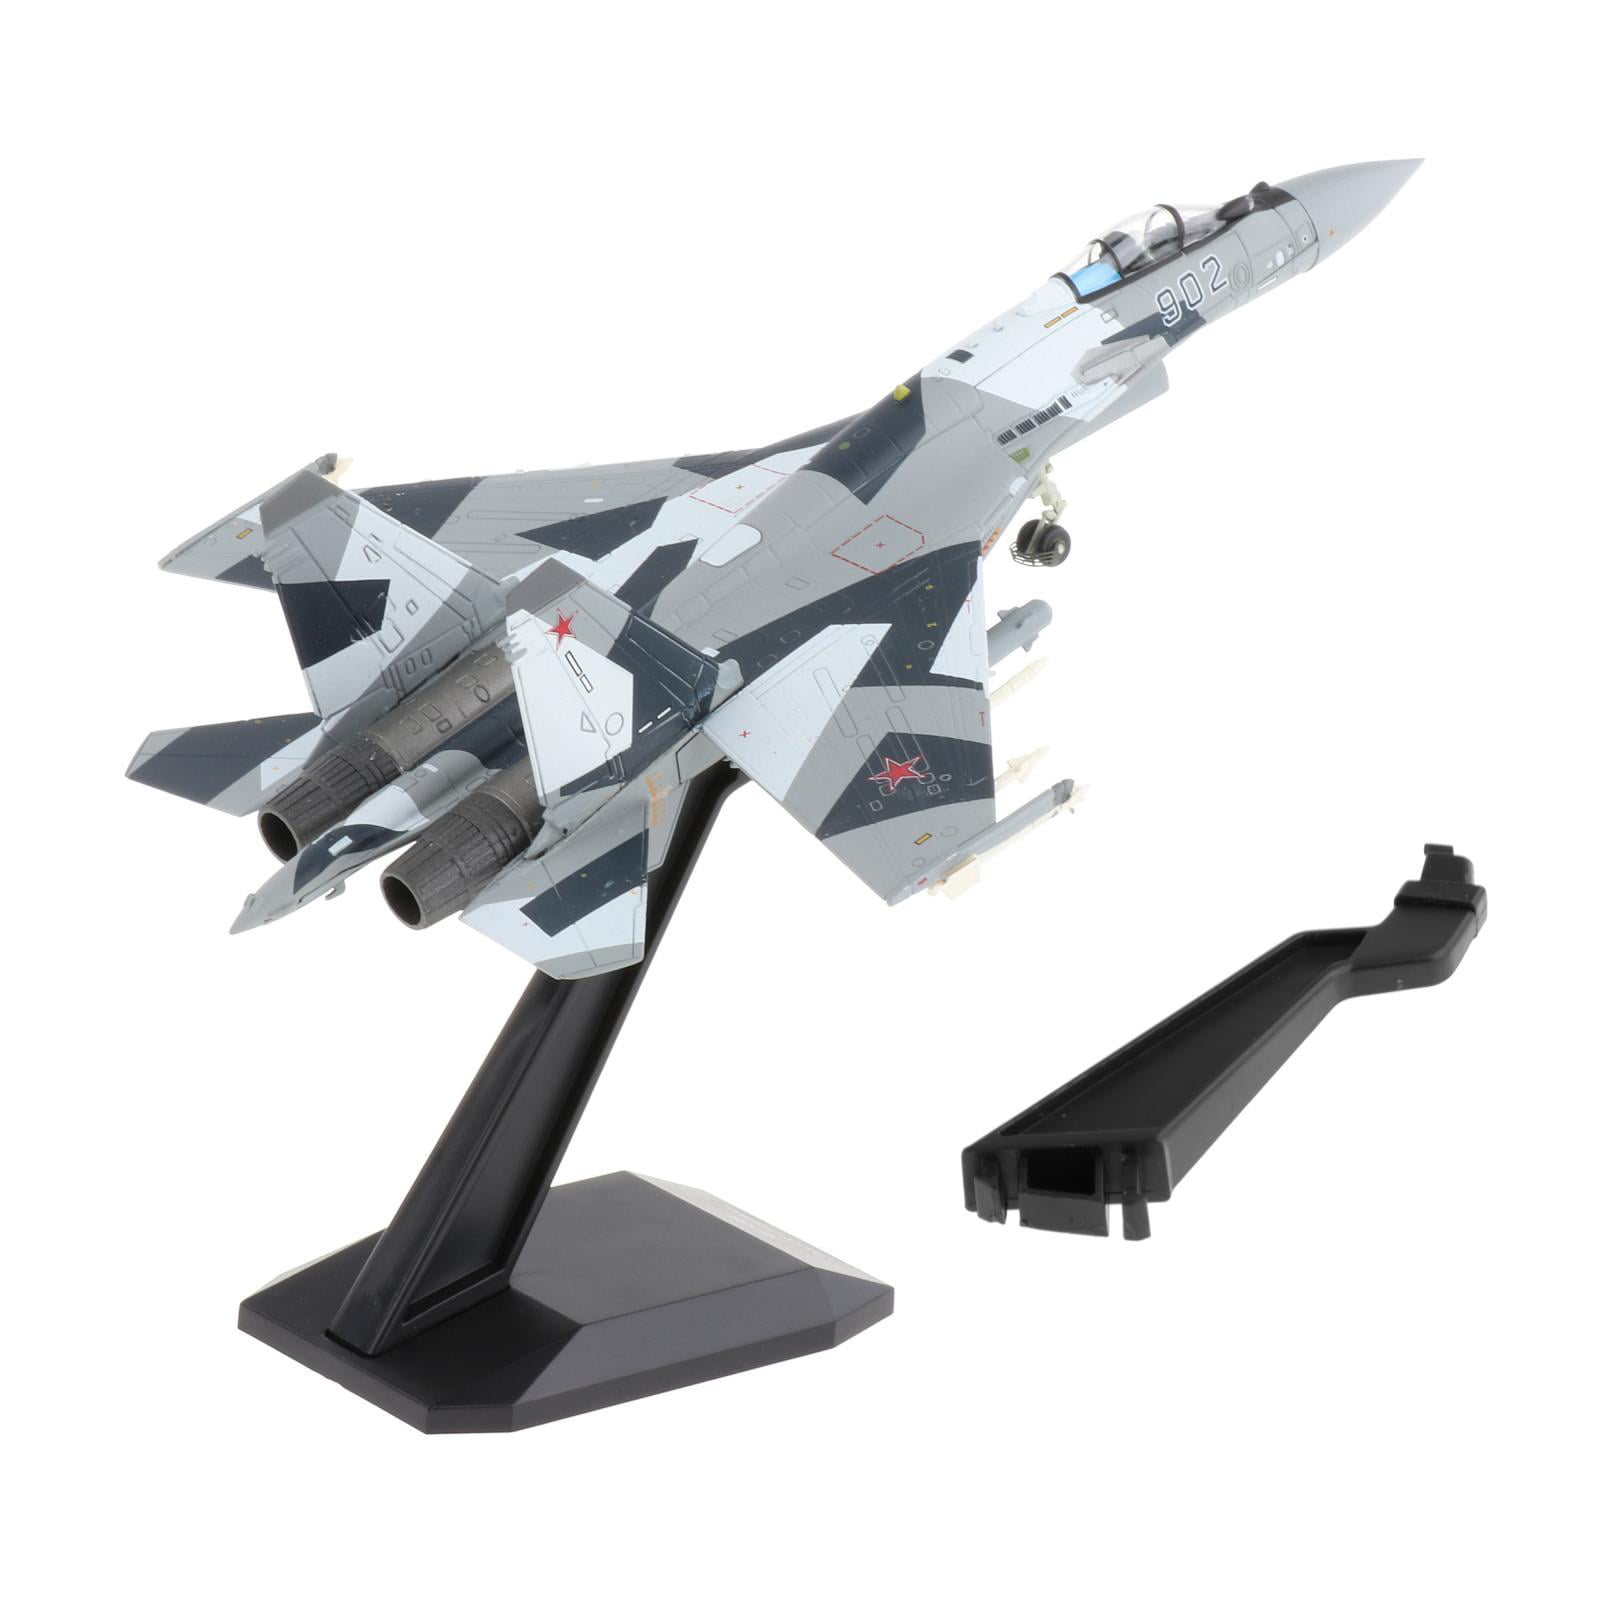 1/100 Fighter Aircraft Airplane Model Su-35 Plane Toy Collection Model Gift 